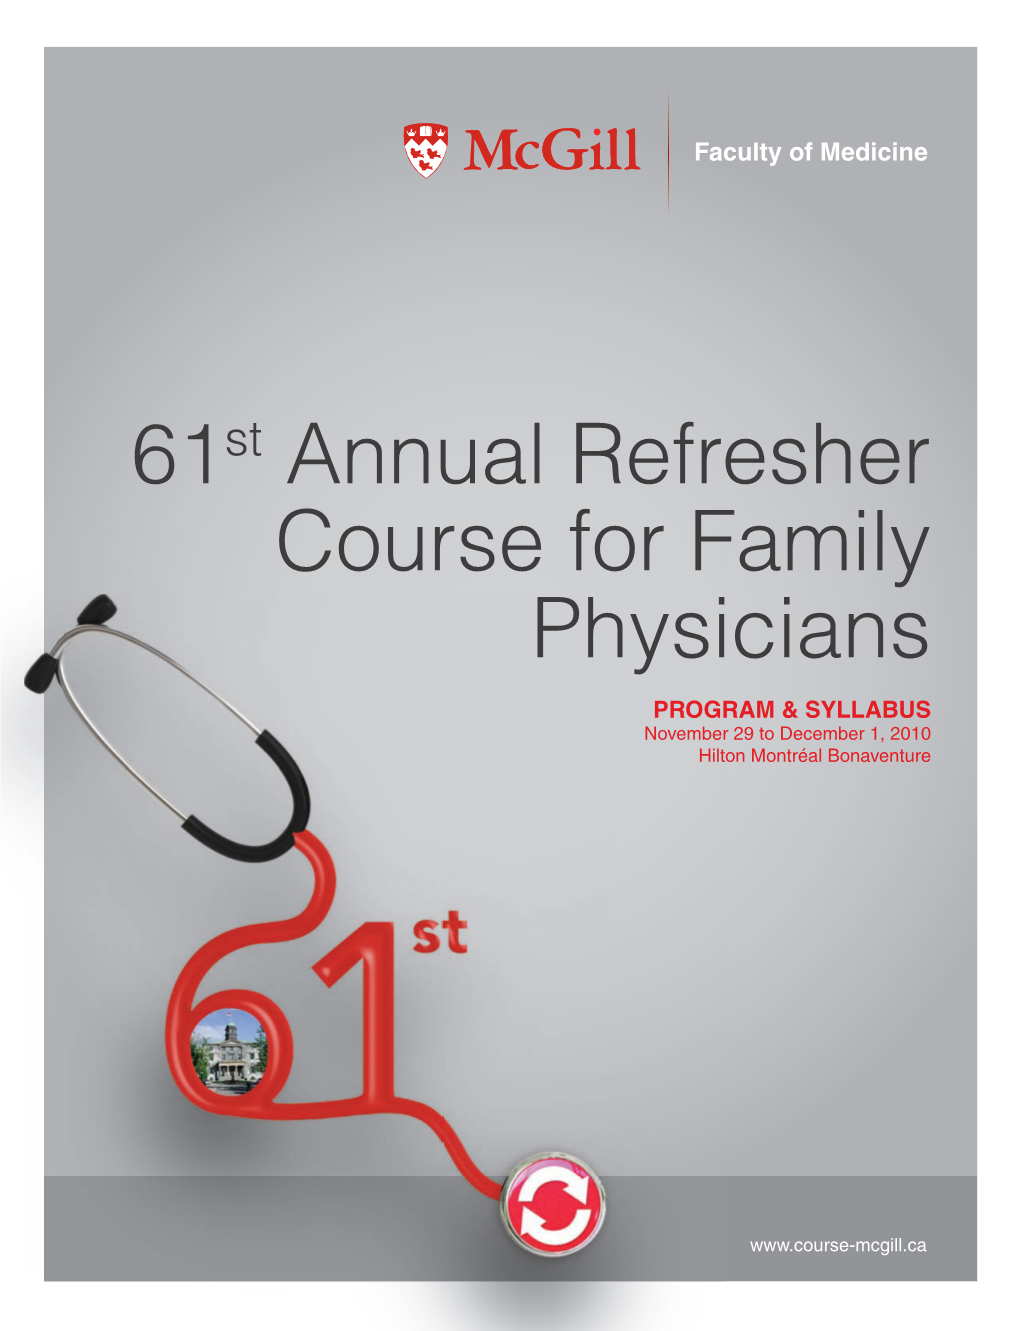 61St Annual Refresher Course for Family Physicians